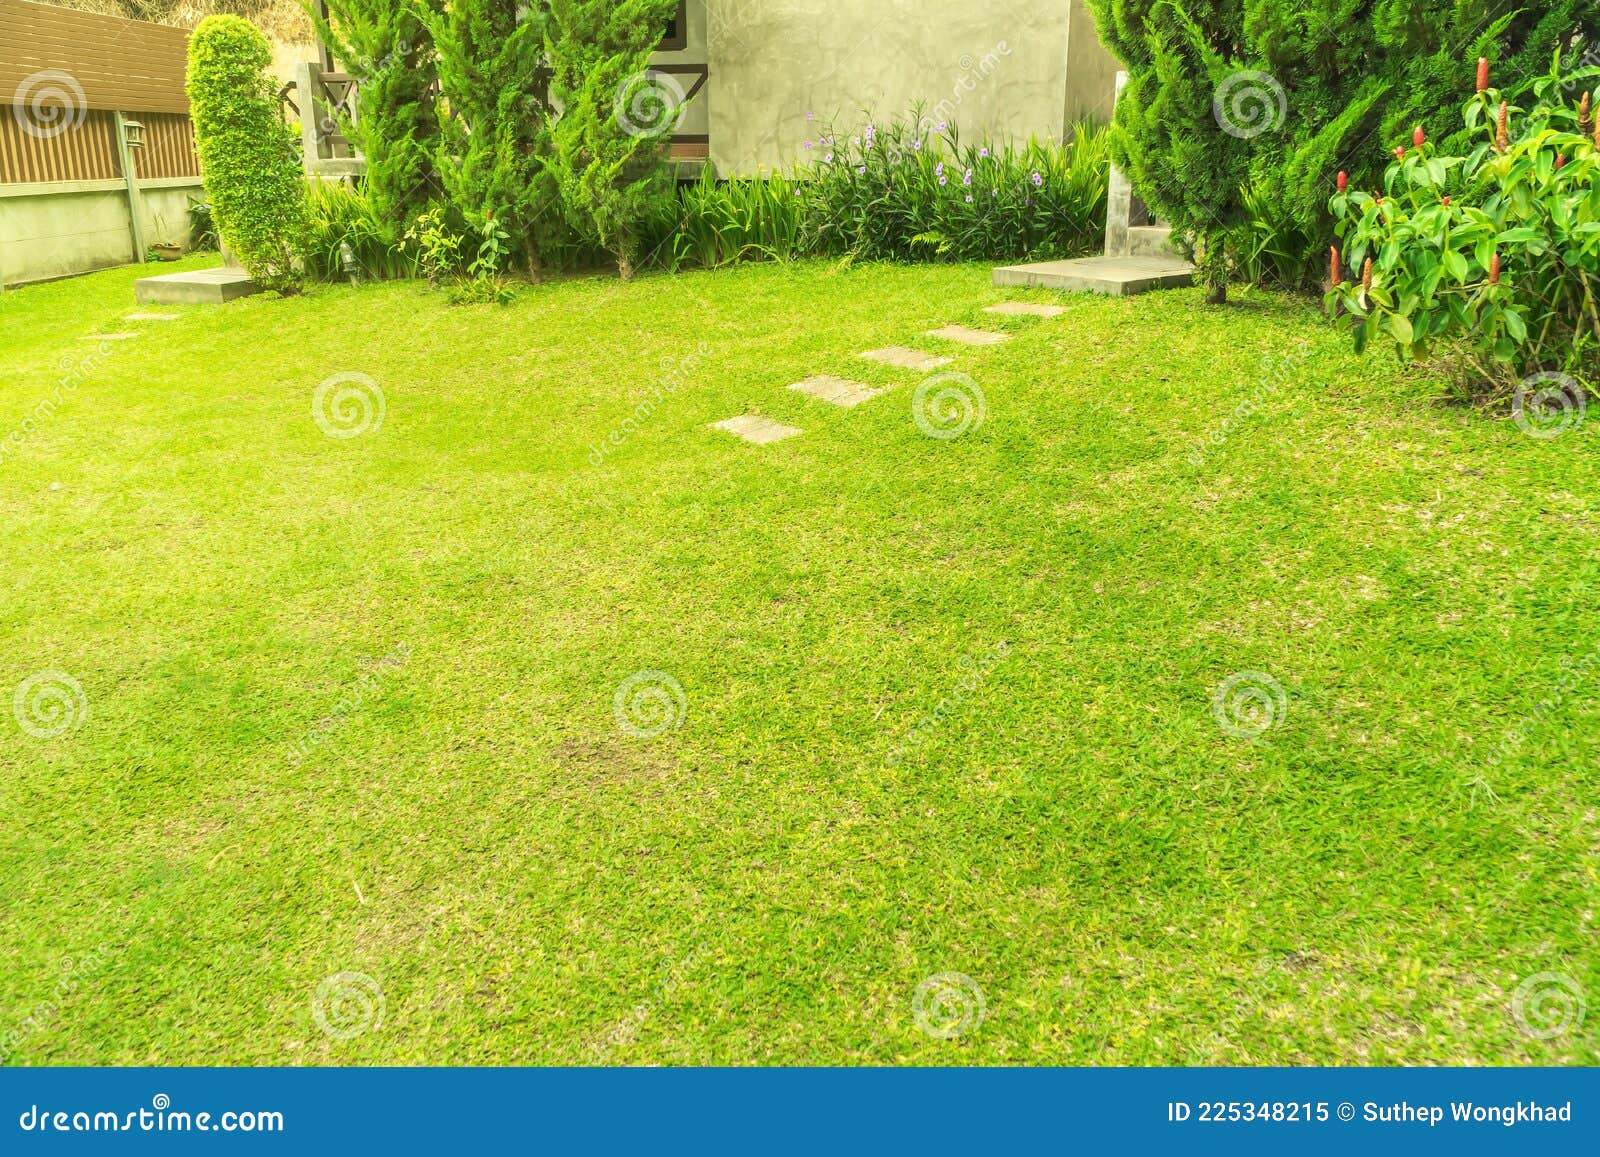 Lawn and Garden Blur Background, the Design Concept for Background, Garden  with Green Lawn and Garden. Landscaped Garden Stock Image - Image of front,  landscaped: 225348215